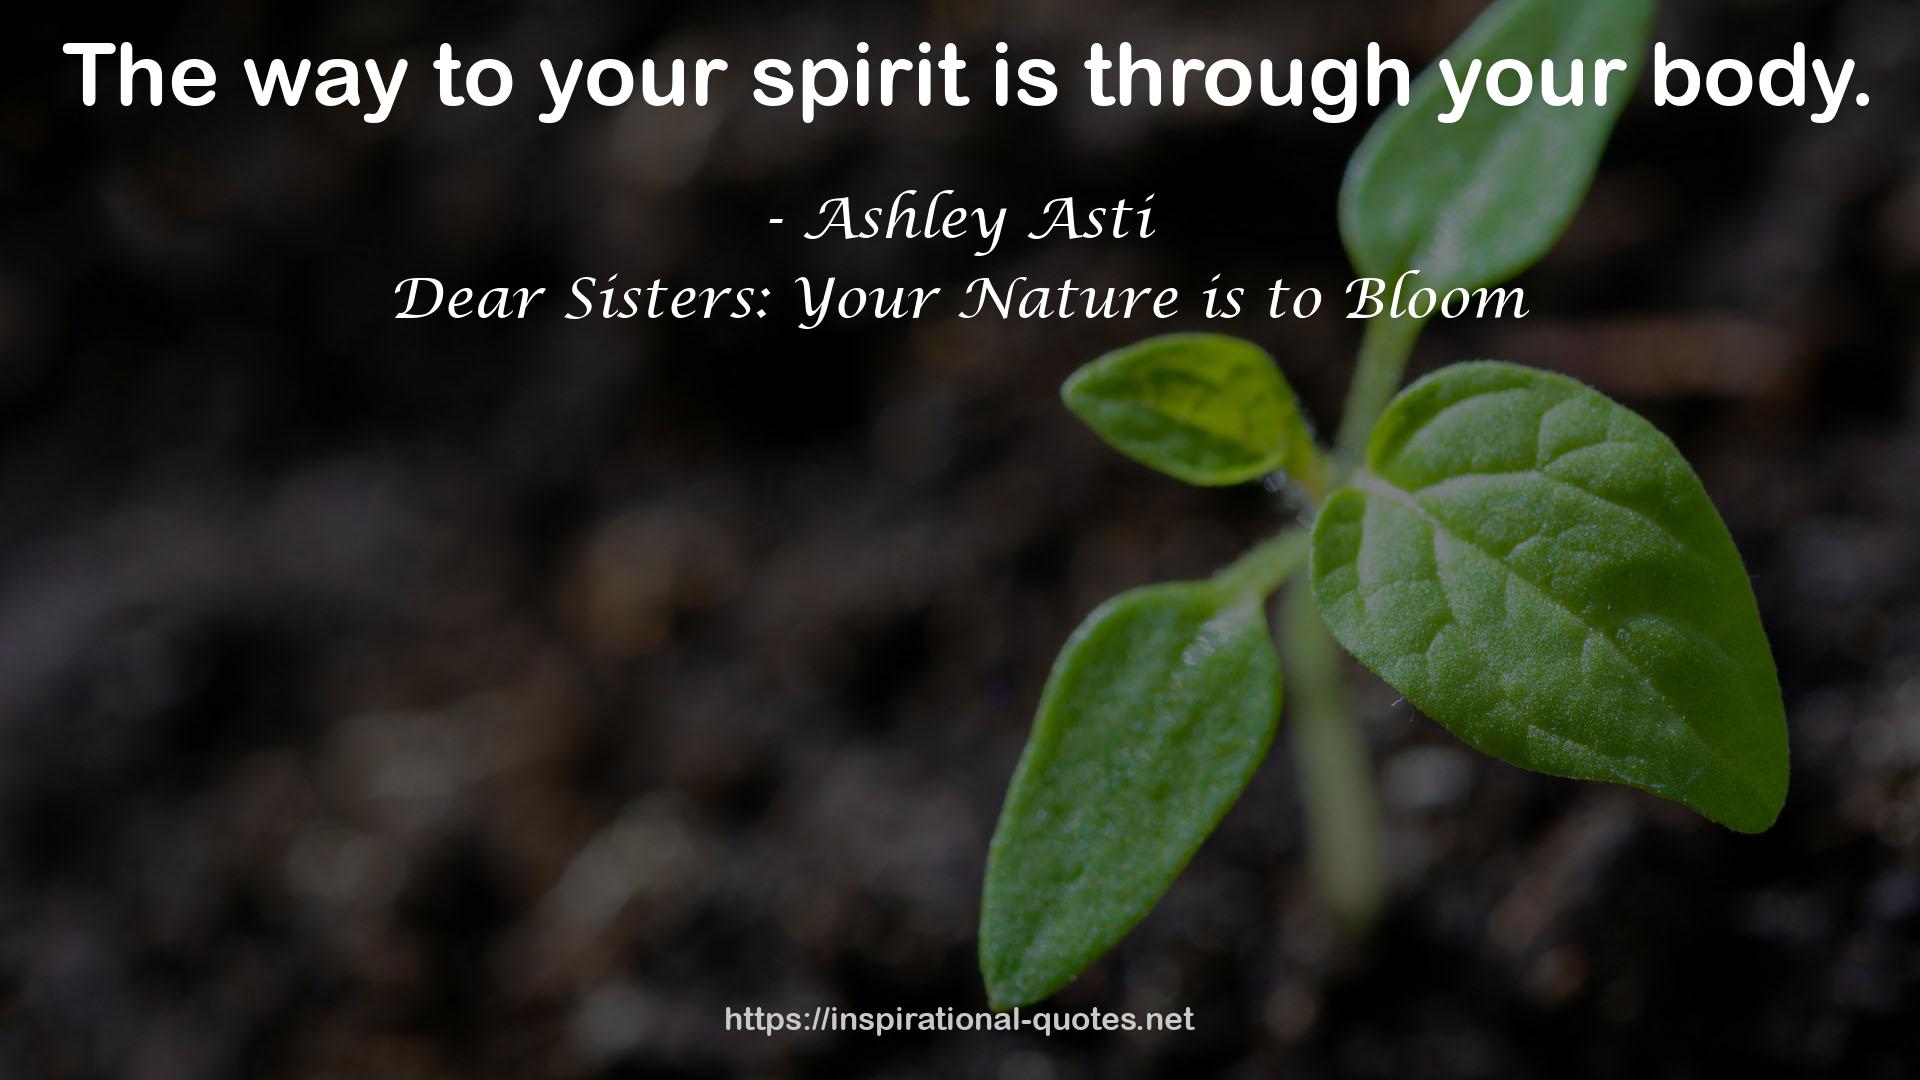 Dear Sisters: Your Nature is to Bloom QUOTES